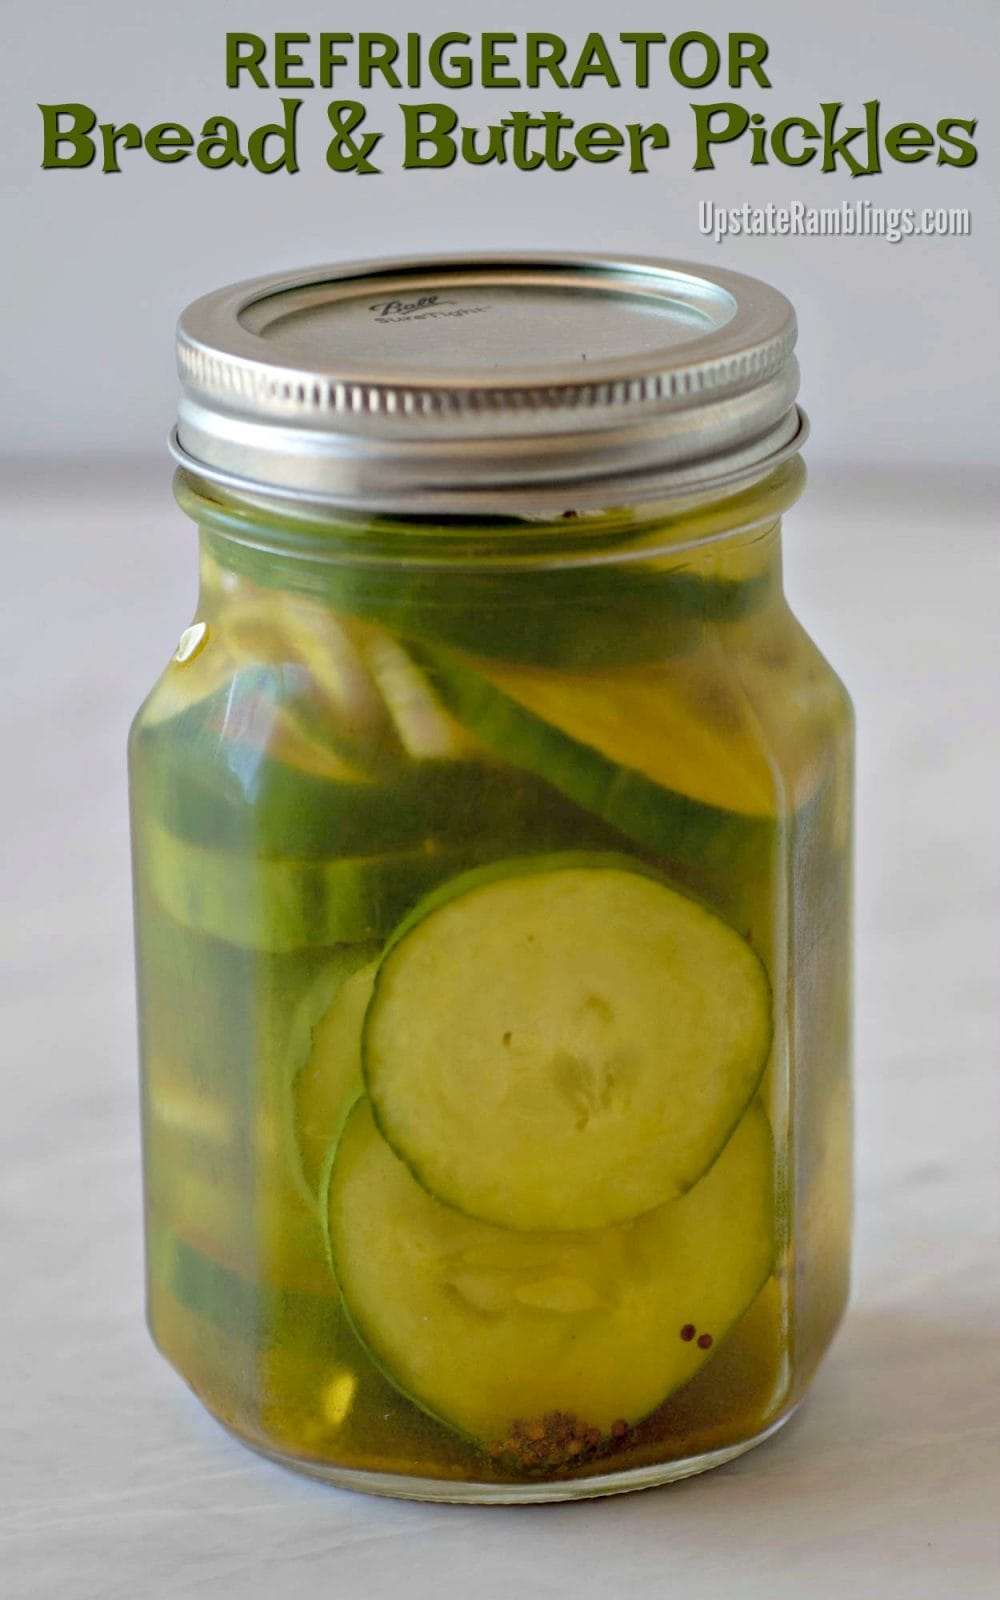 Make these quick and easy Refrigerator Bread and Butter Pickles with no canning equipment or fuss. These homemade pickles are made from garden fresh cucumbers, vinegar and spices for an easy side dish for your summer sandwiches. #pickles #refrigeratorpickles #breadandbutterpickles #quickpickles